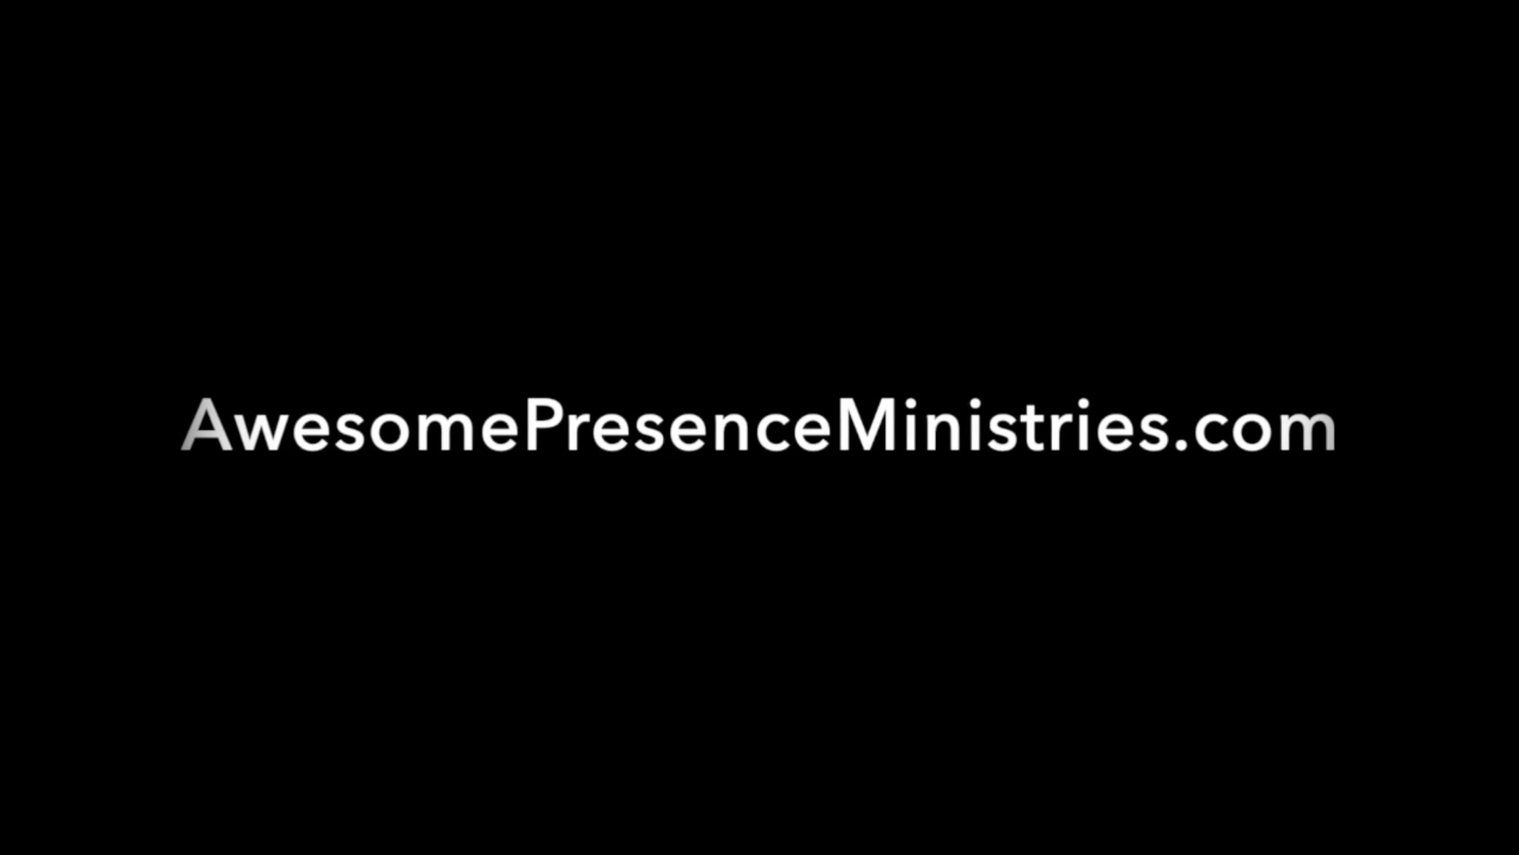 Psalm 23 (Surely Goodness, Surely Mercy) by Awesome Presence Ministries